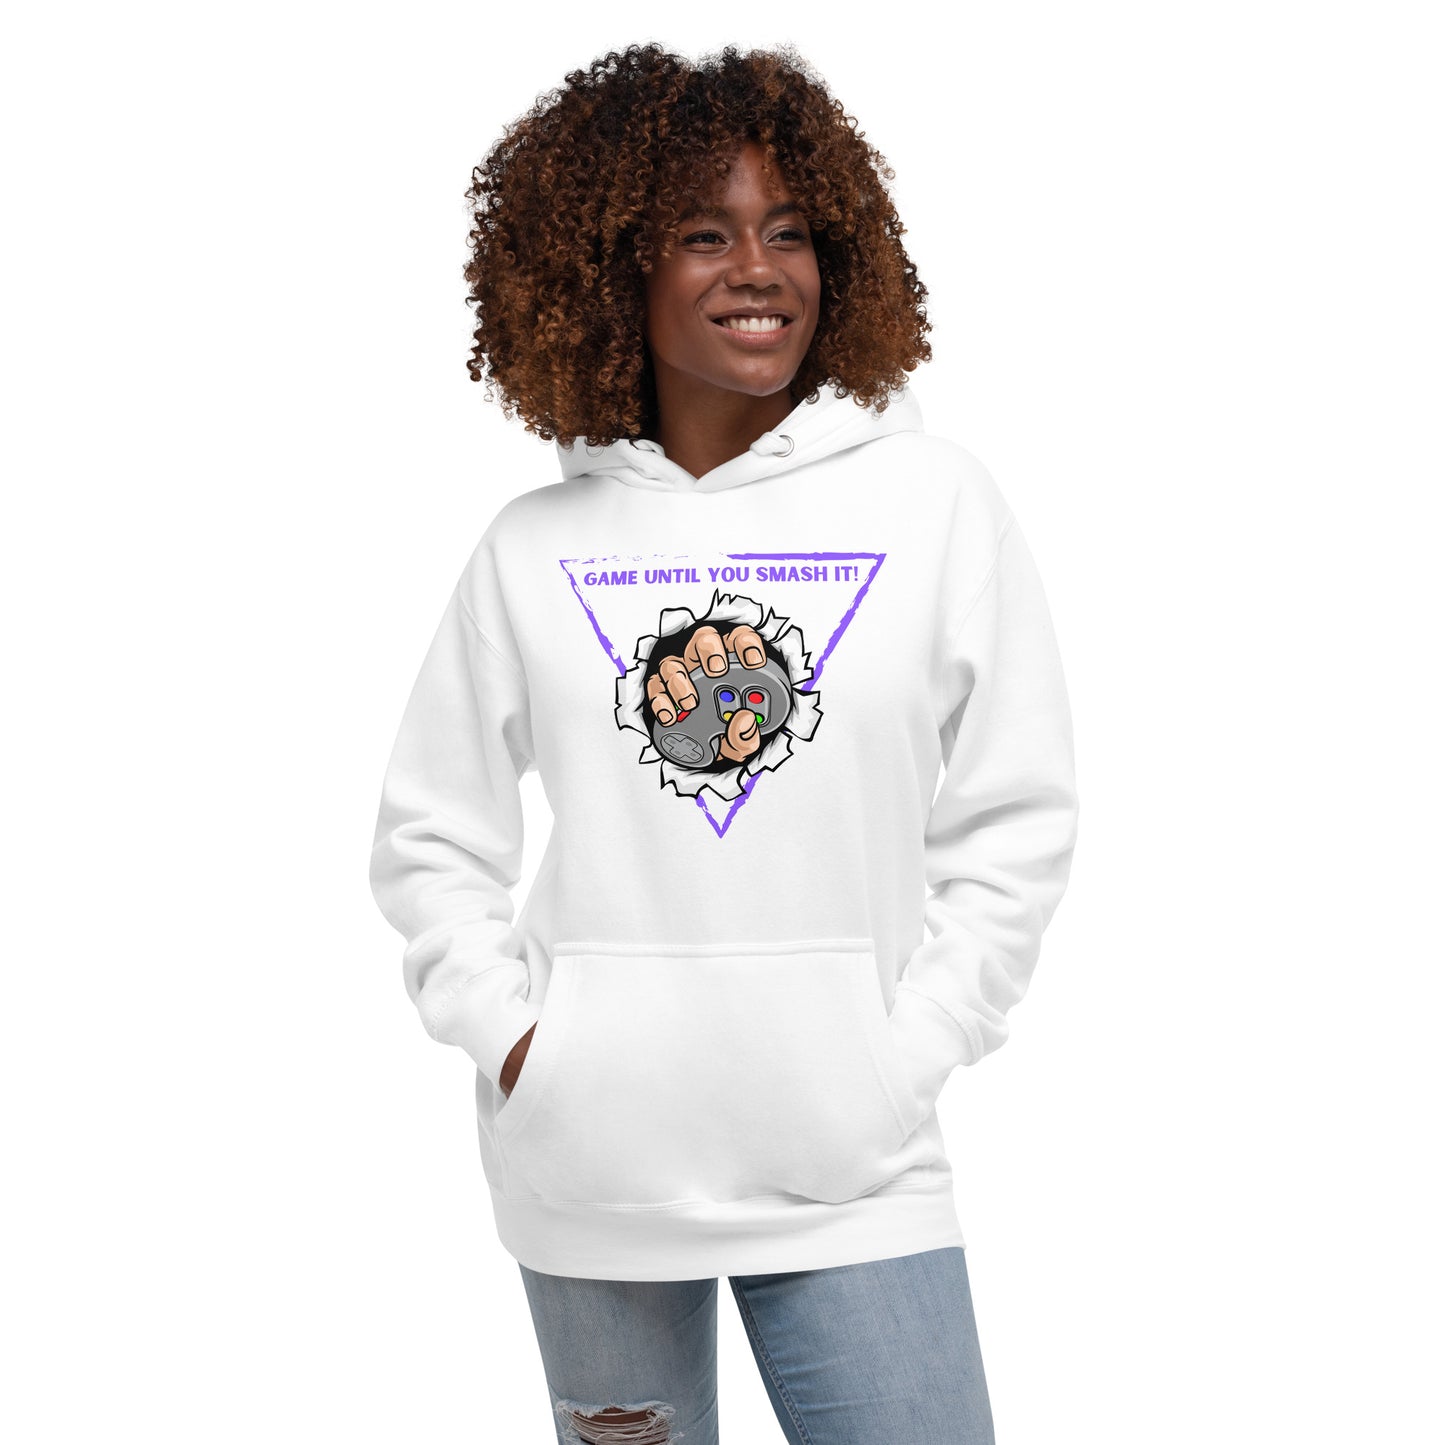 Woman in white hoodie with game until you smash it design